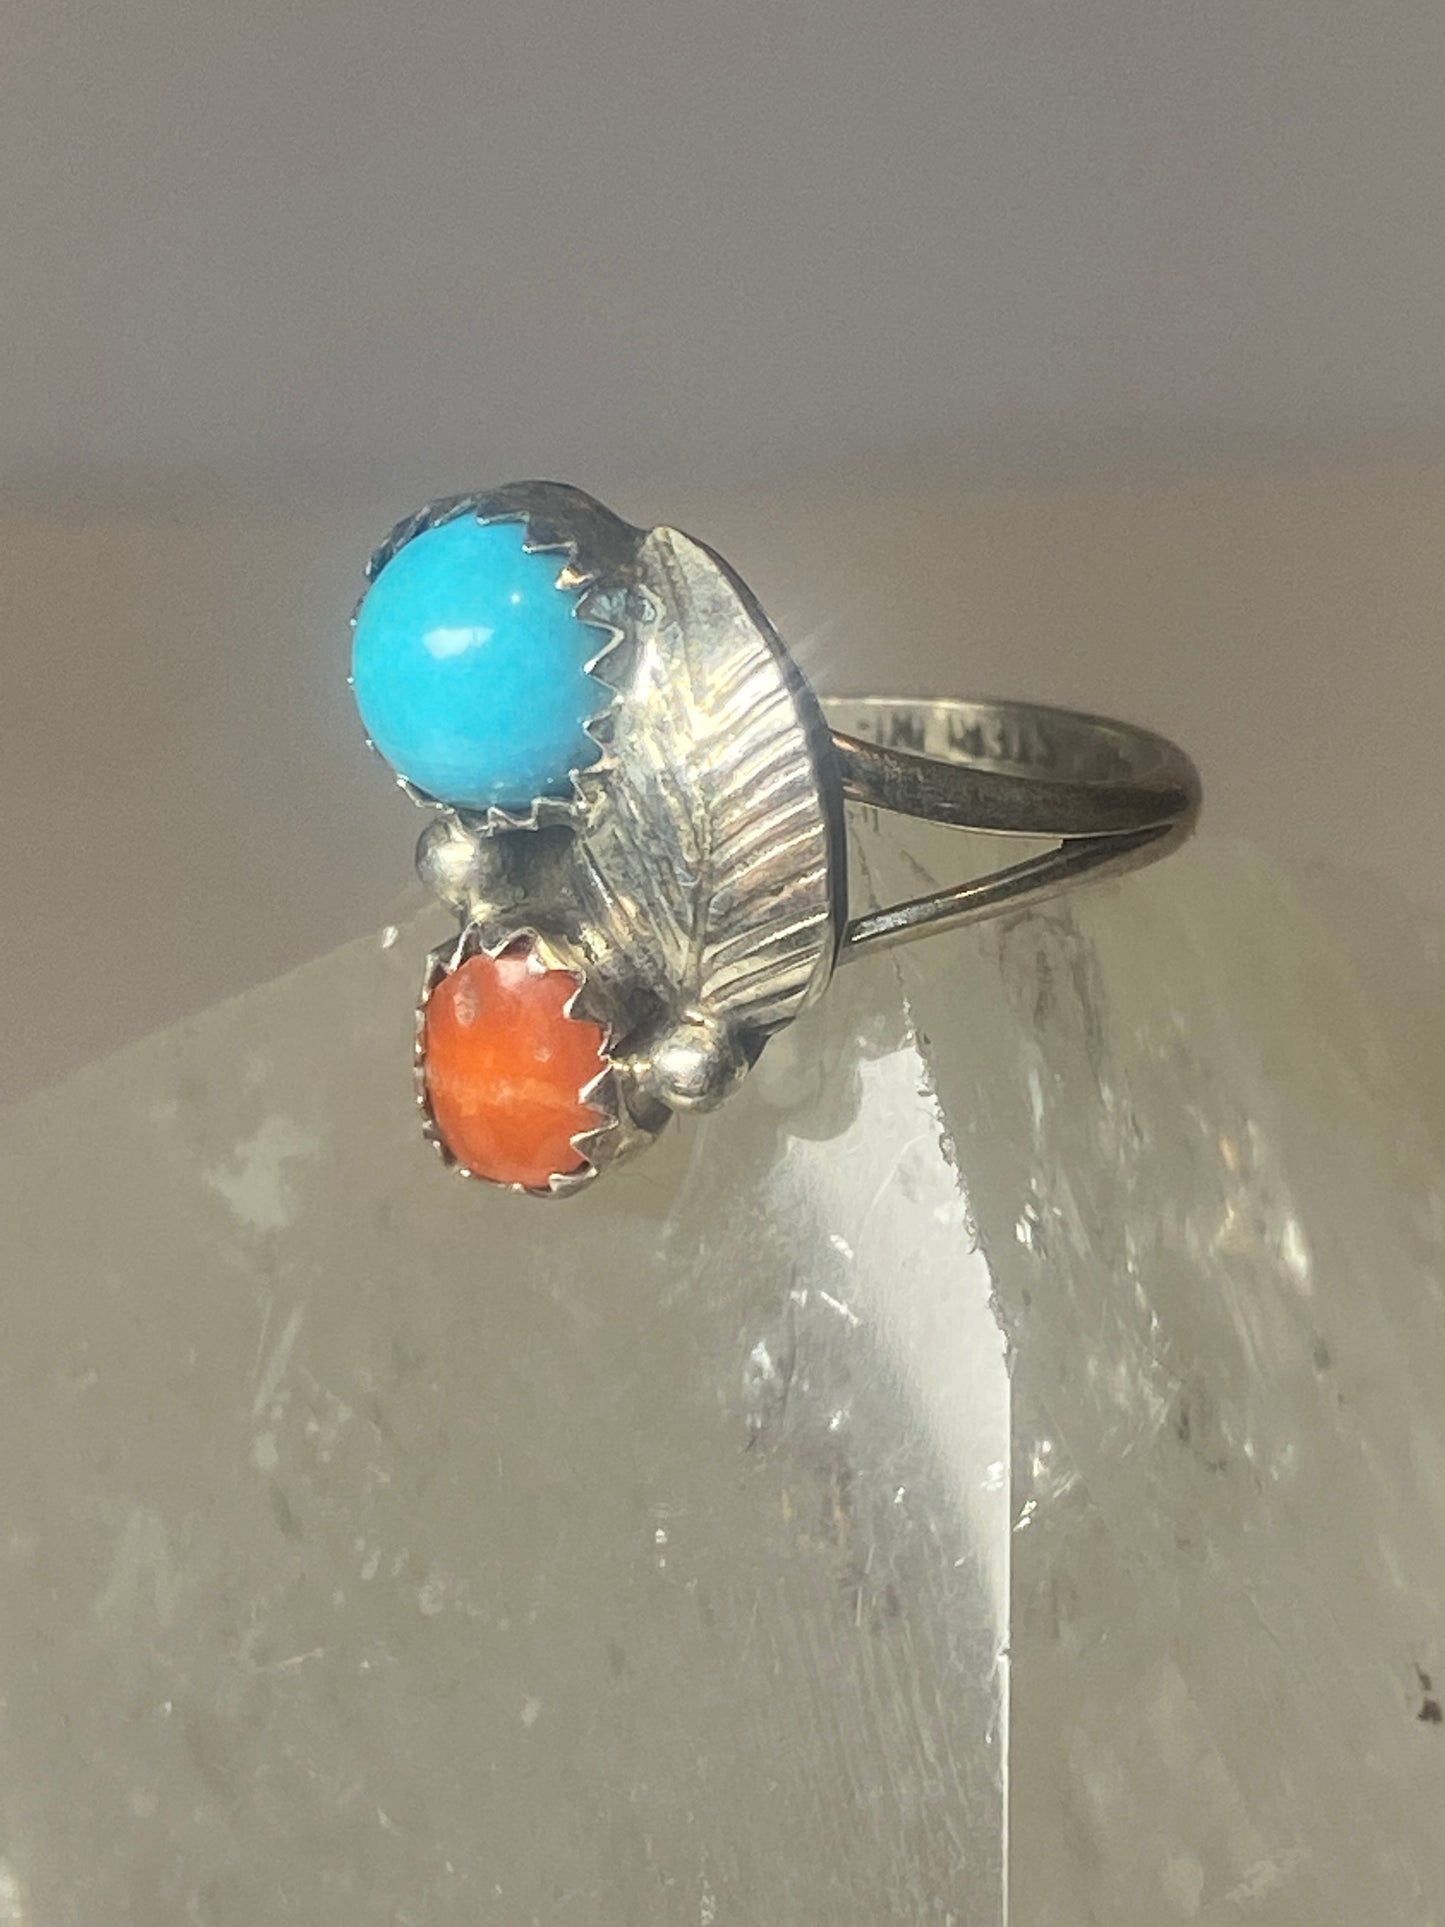 Turquoise ring coral southwest pinky floral leaves blossom baby children women girls  u